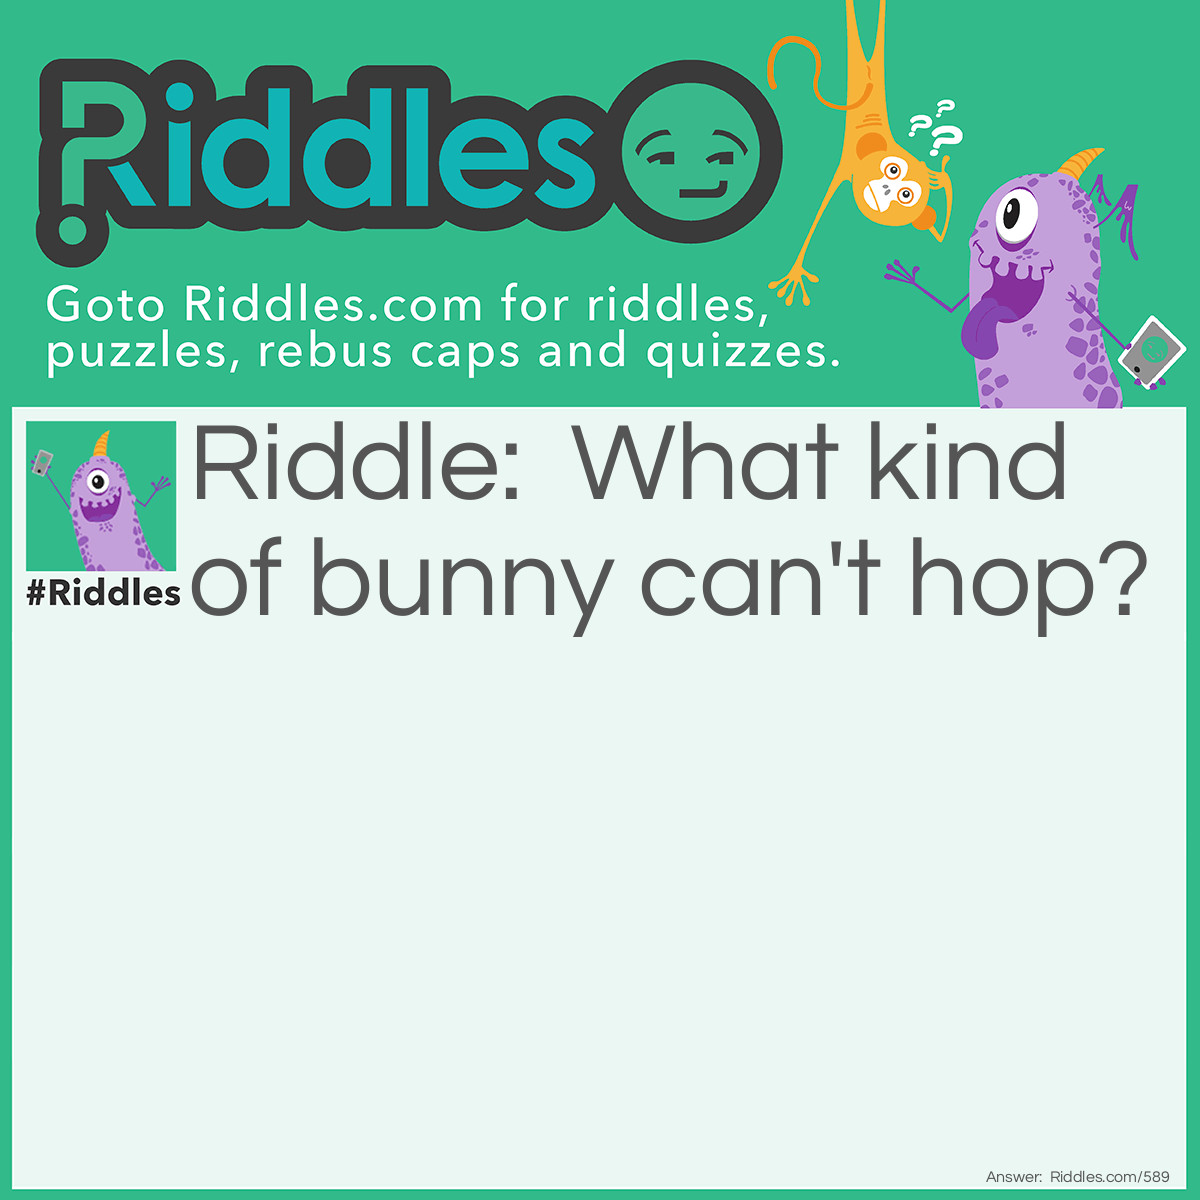 Riddle: What kind of bunny can't hop? Answer: A chocolate bunny!